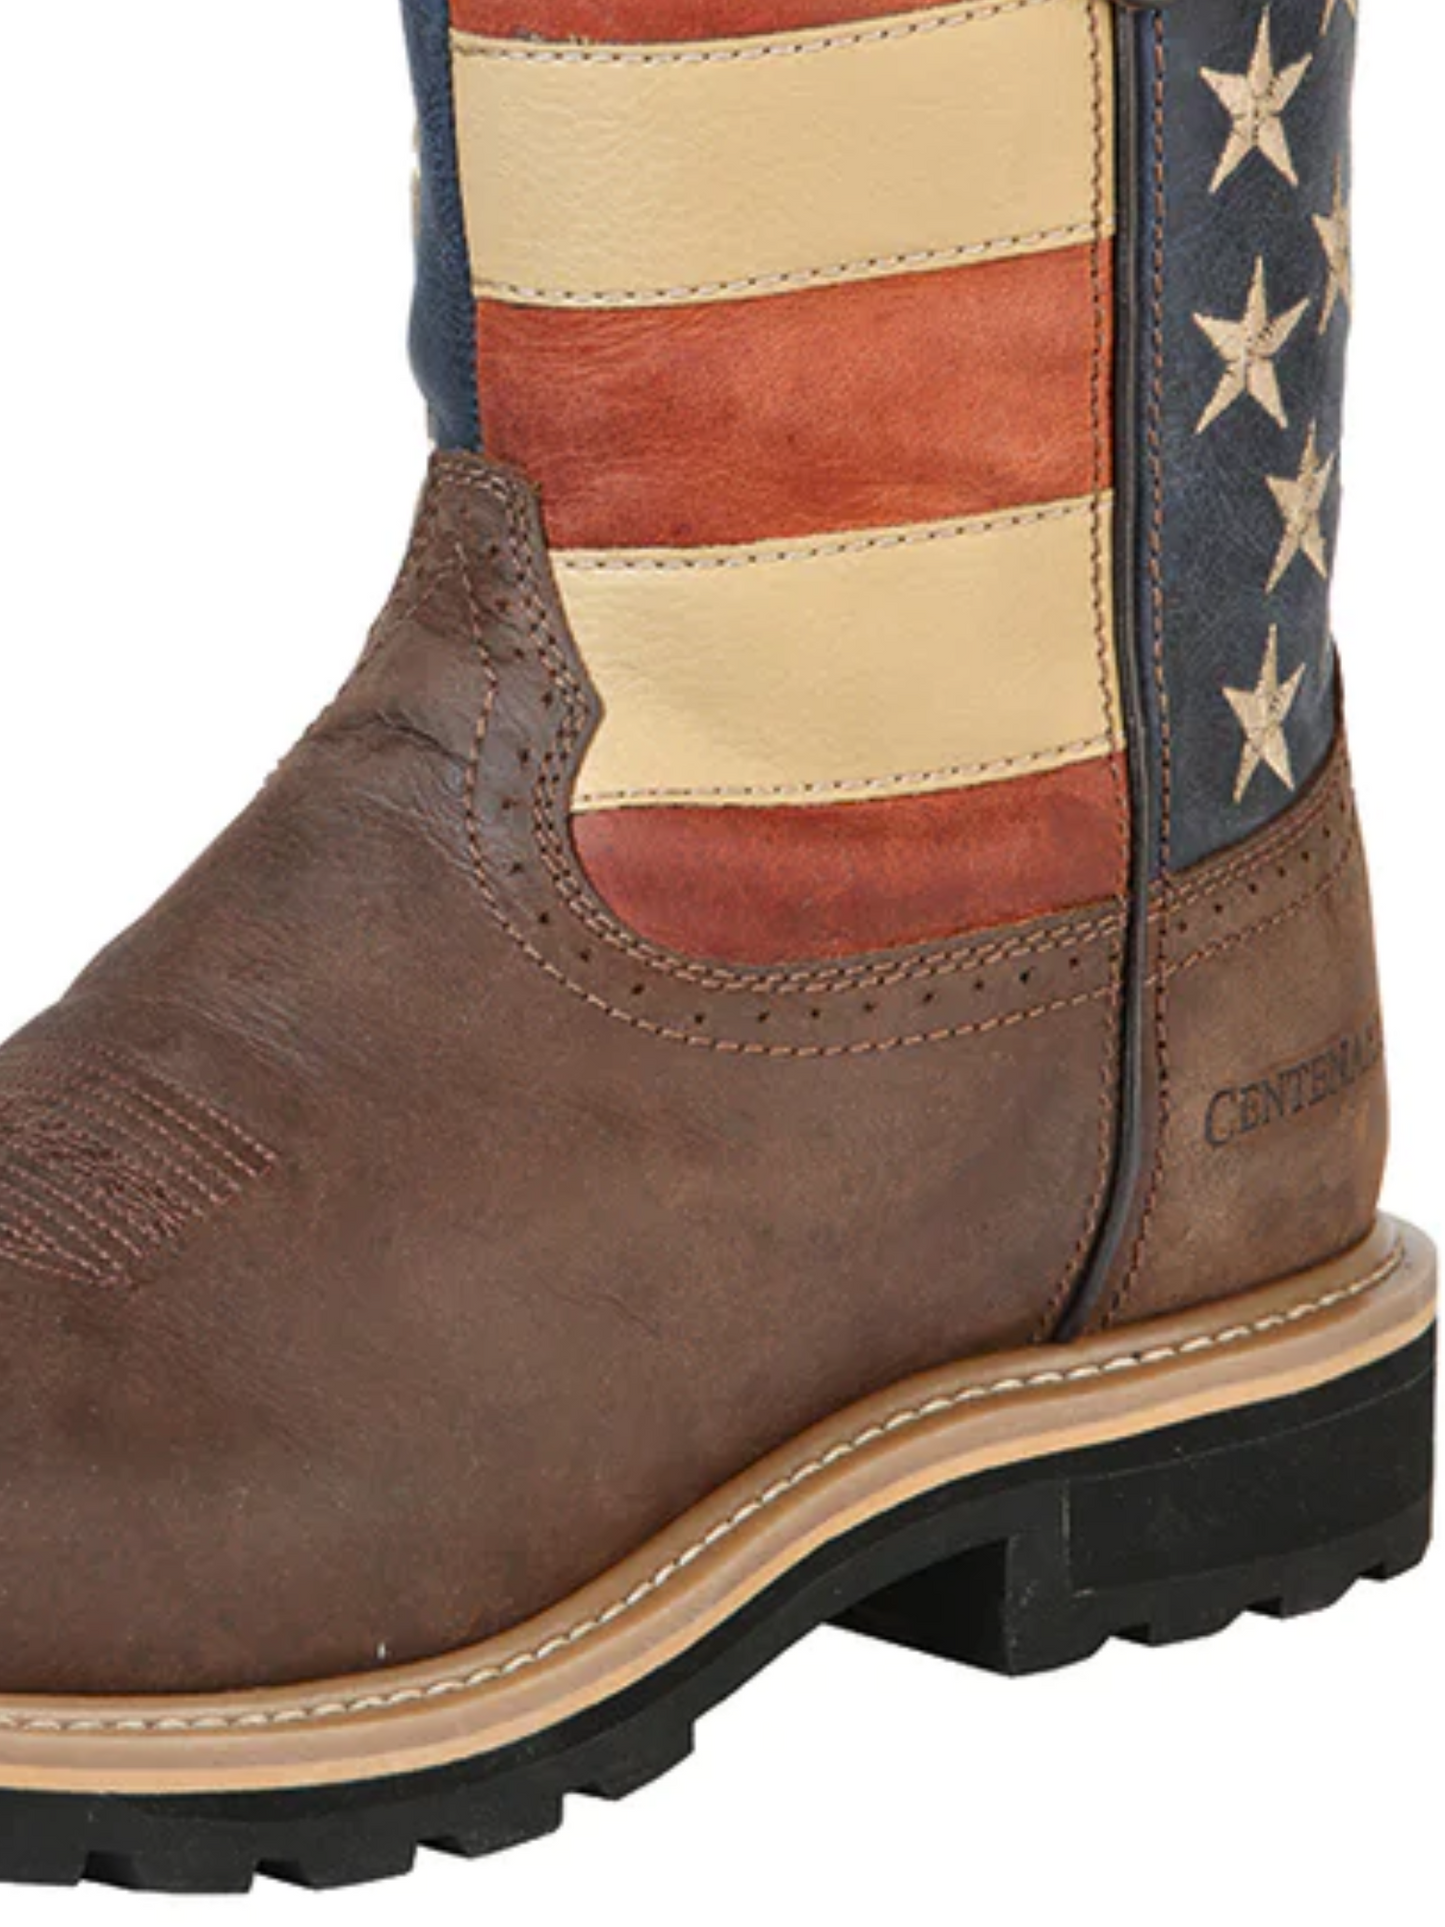 Goodyear Waterproof Construction Work Boots USA Flag with Genuine Leather Soft Toe for Men 'Centenario' - ID: 126416 Waterproof Work Boots Centenario